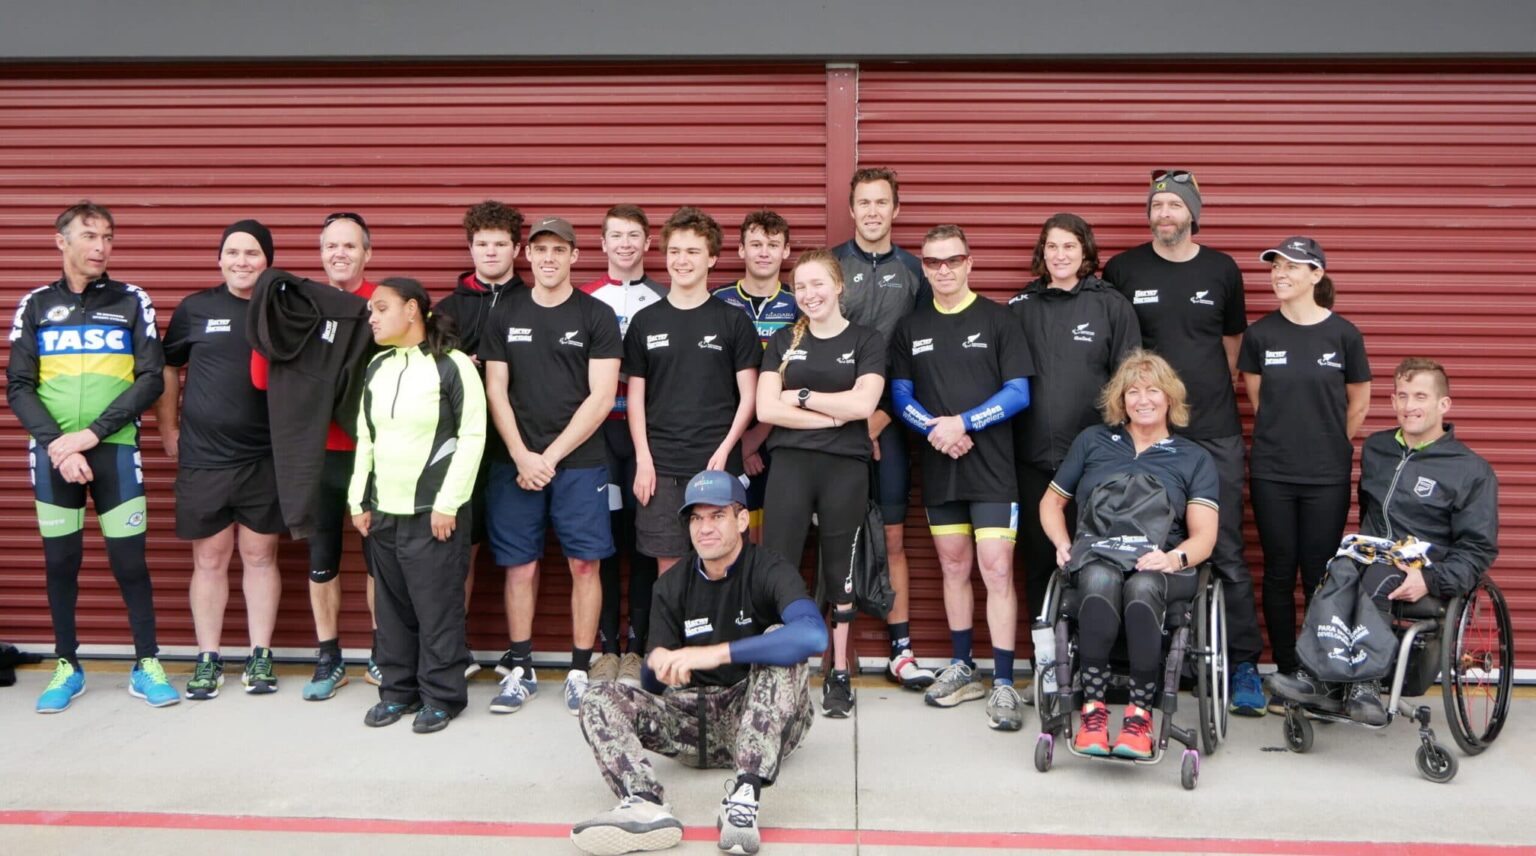 A group photo of Para athletes and coaches